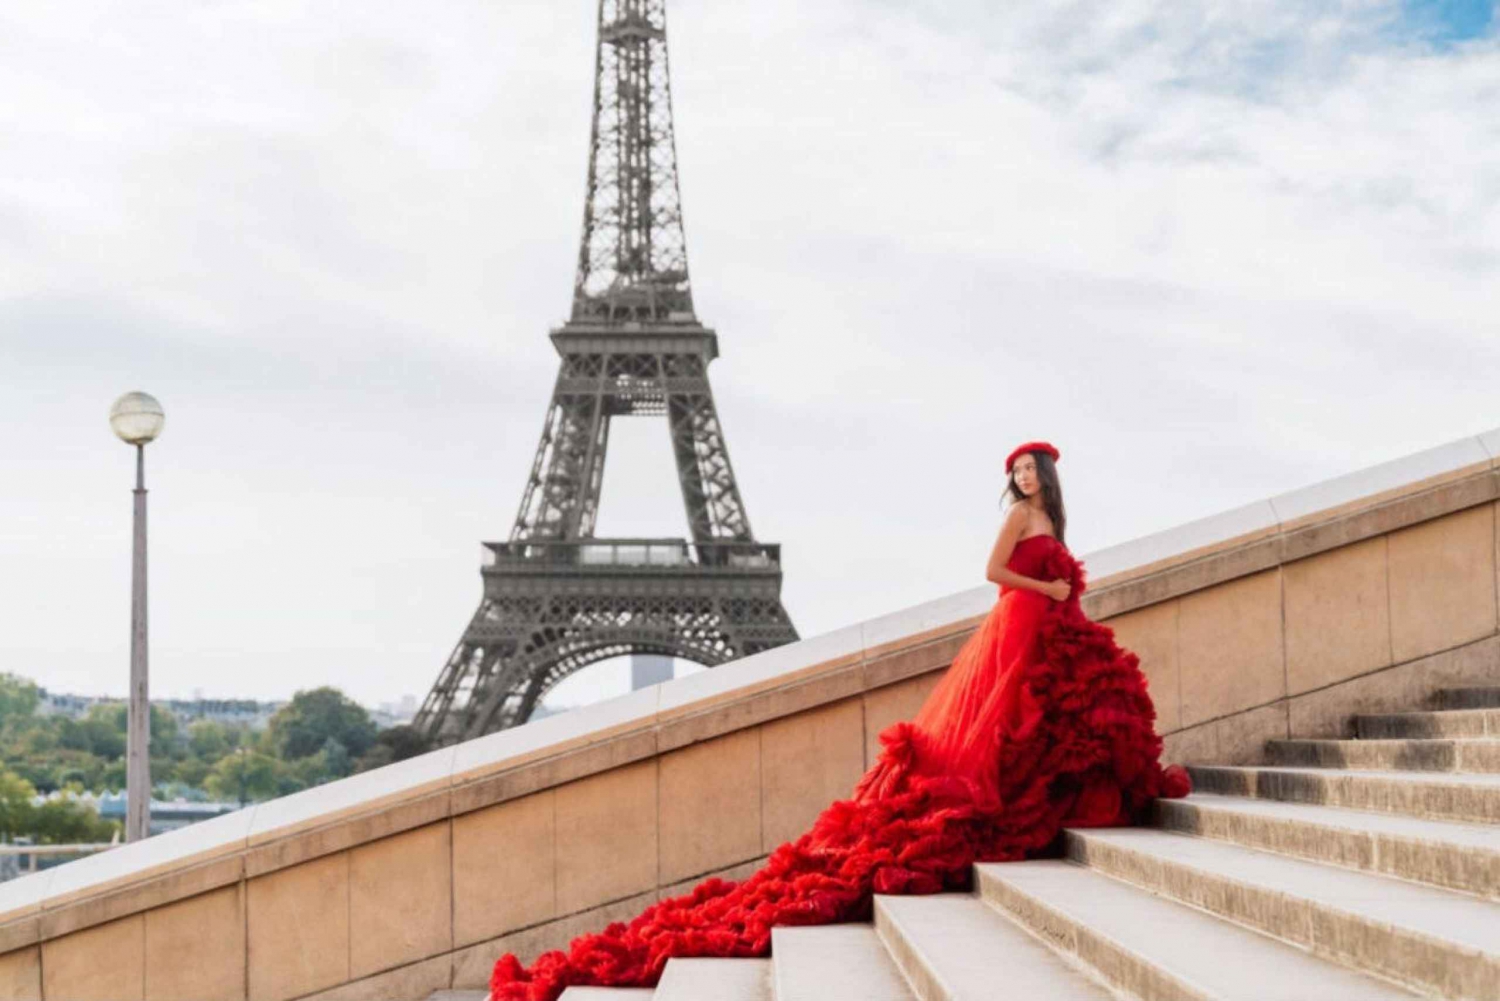 Paris : Exclusive Photoshoot with Princess Dress Included